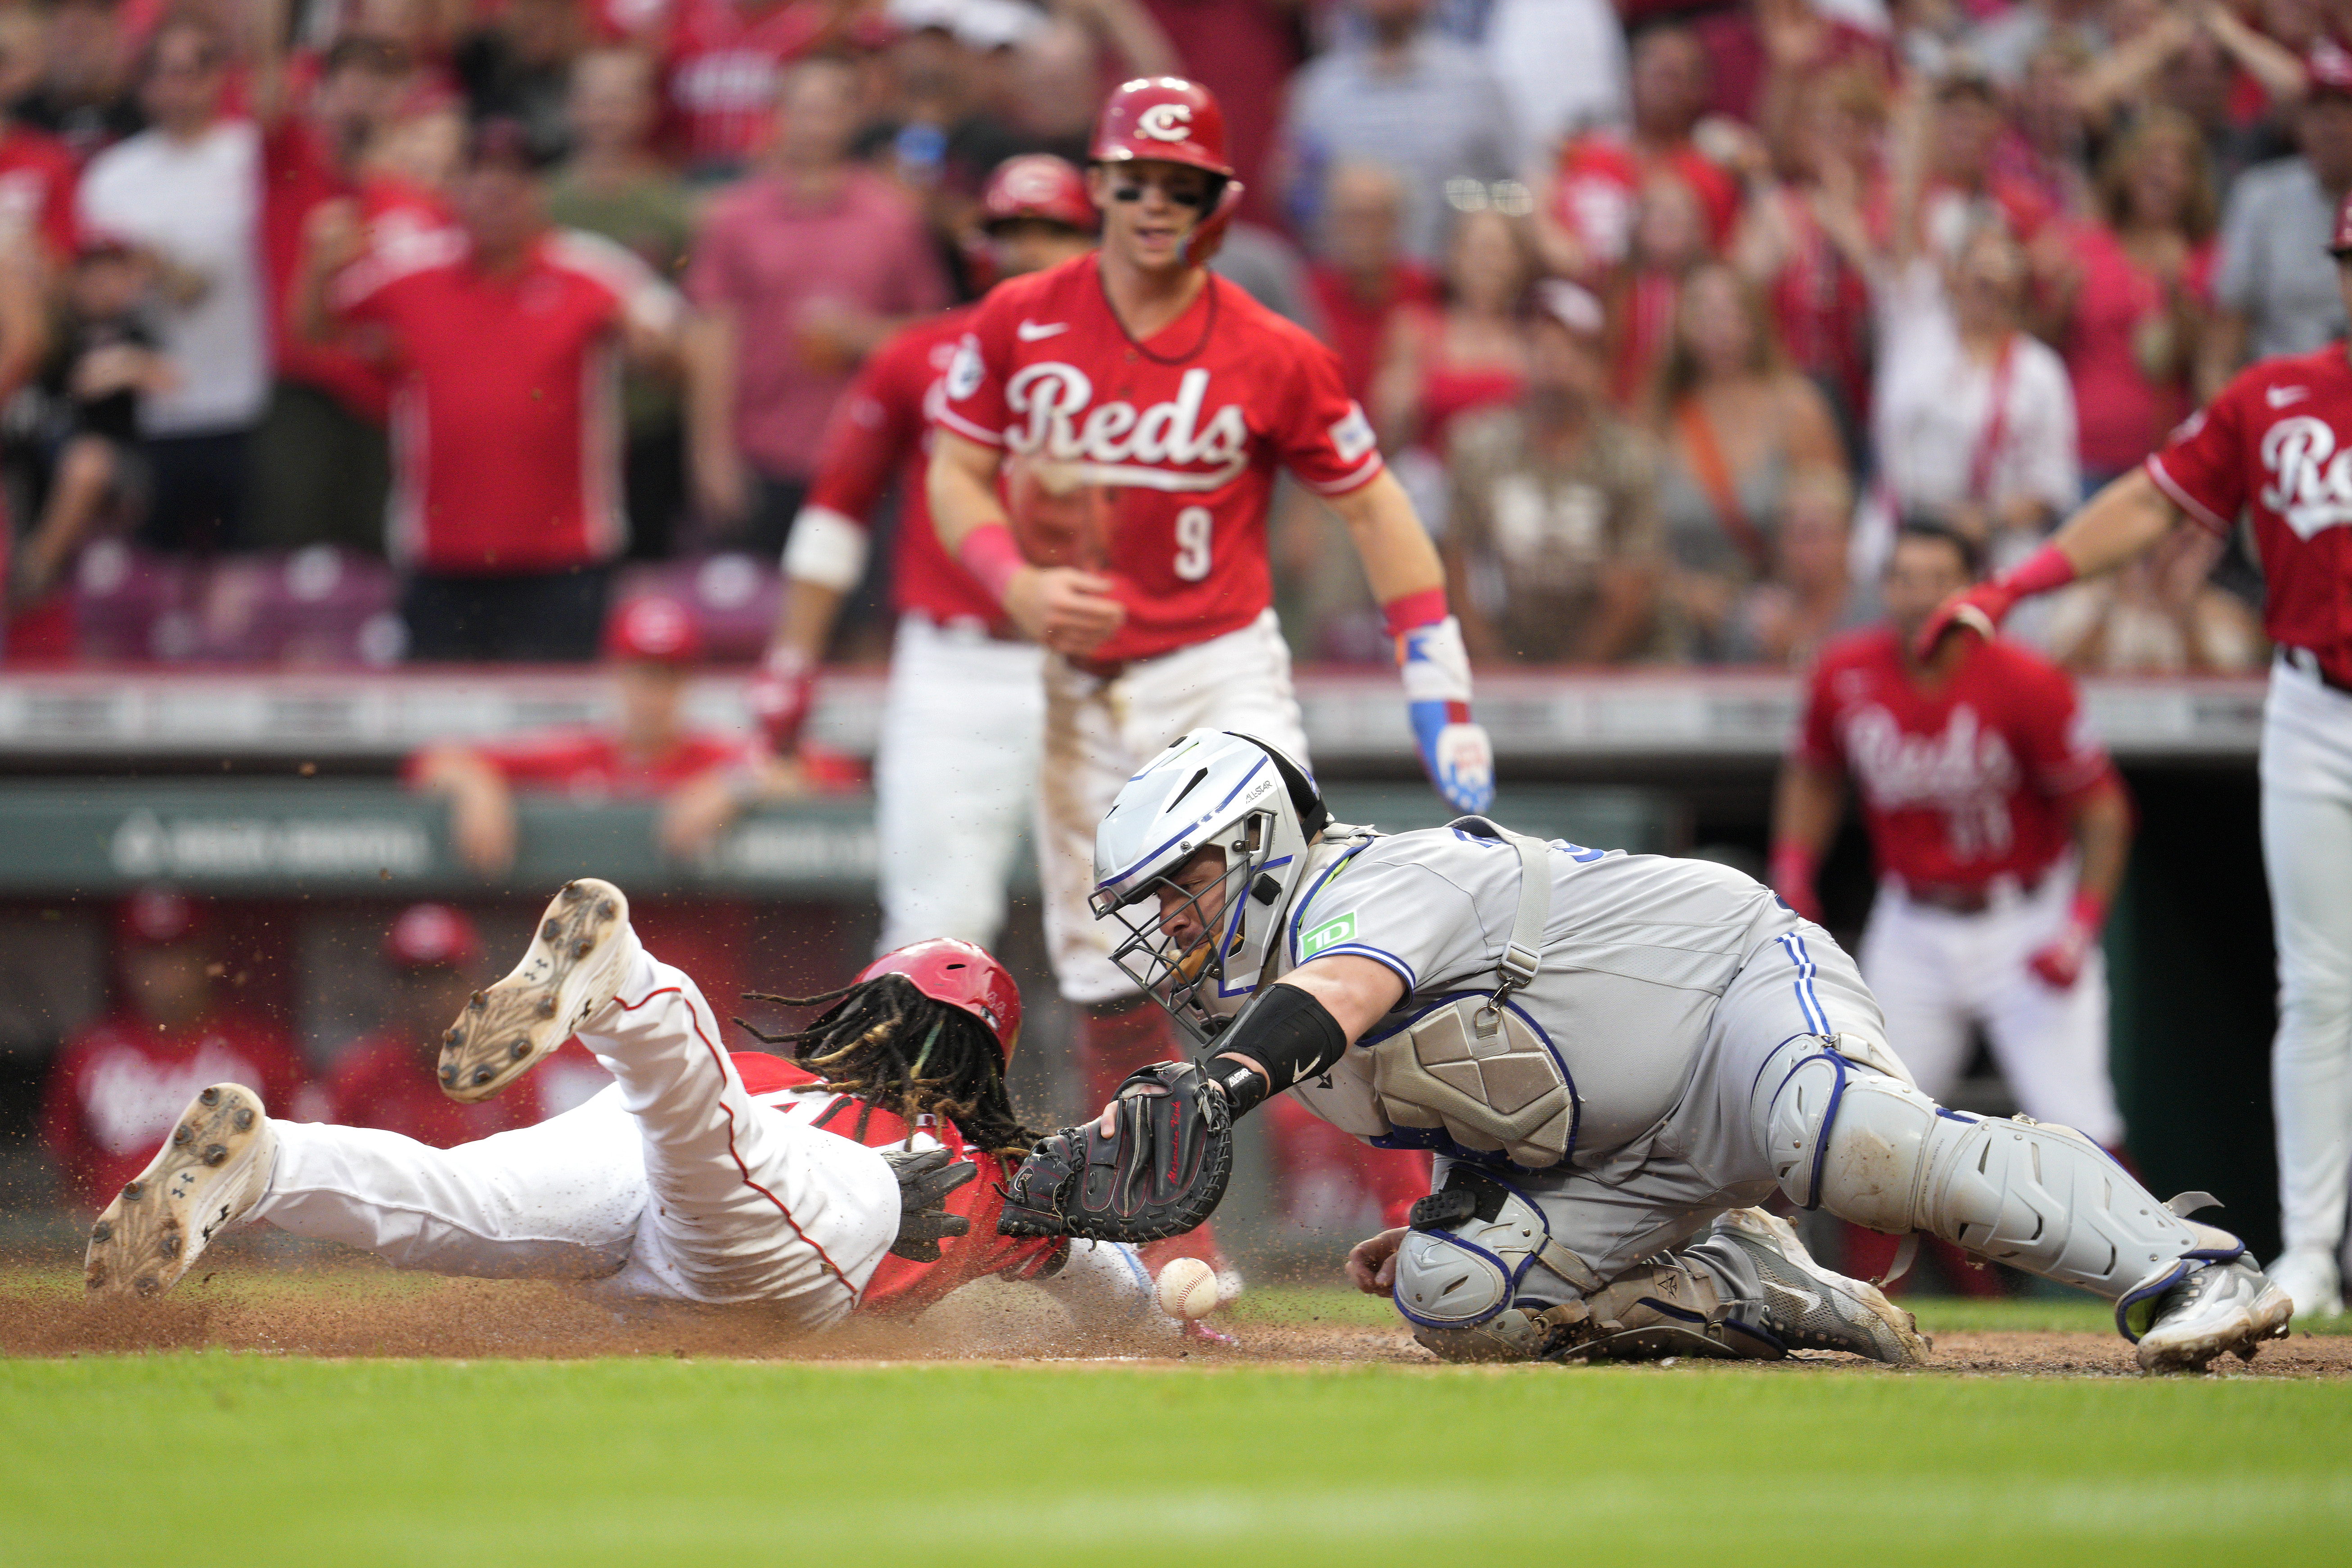 Christian Encarnacion-Strand of the Cincinnati Reds slides in safely  News Photo - Getty Images